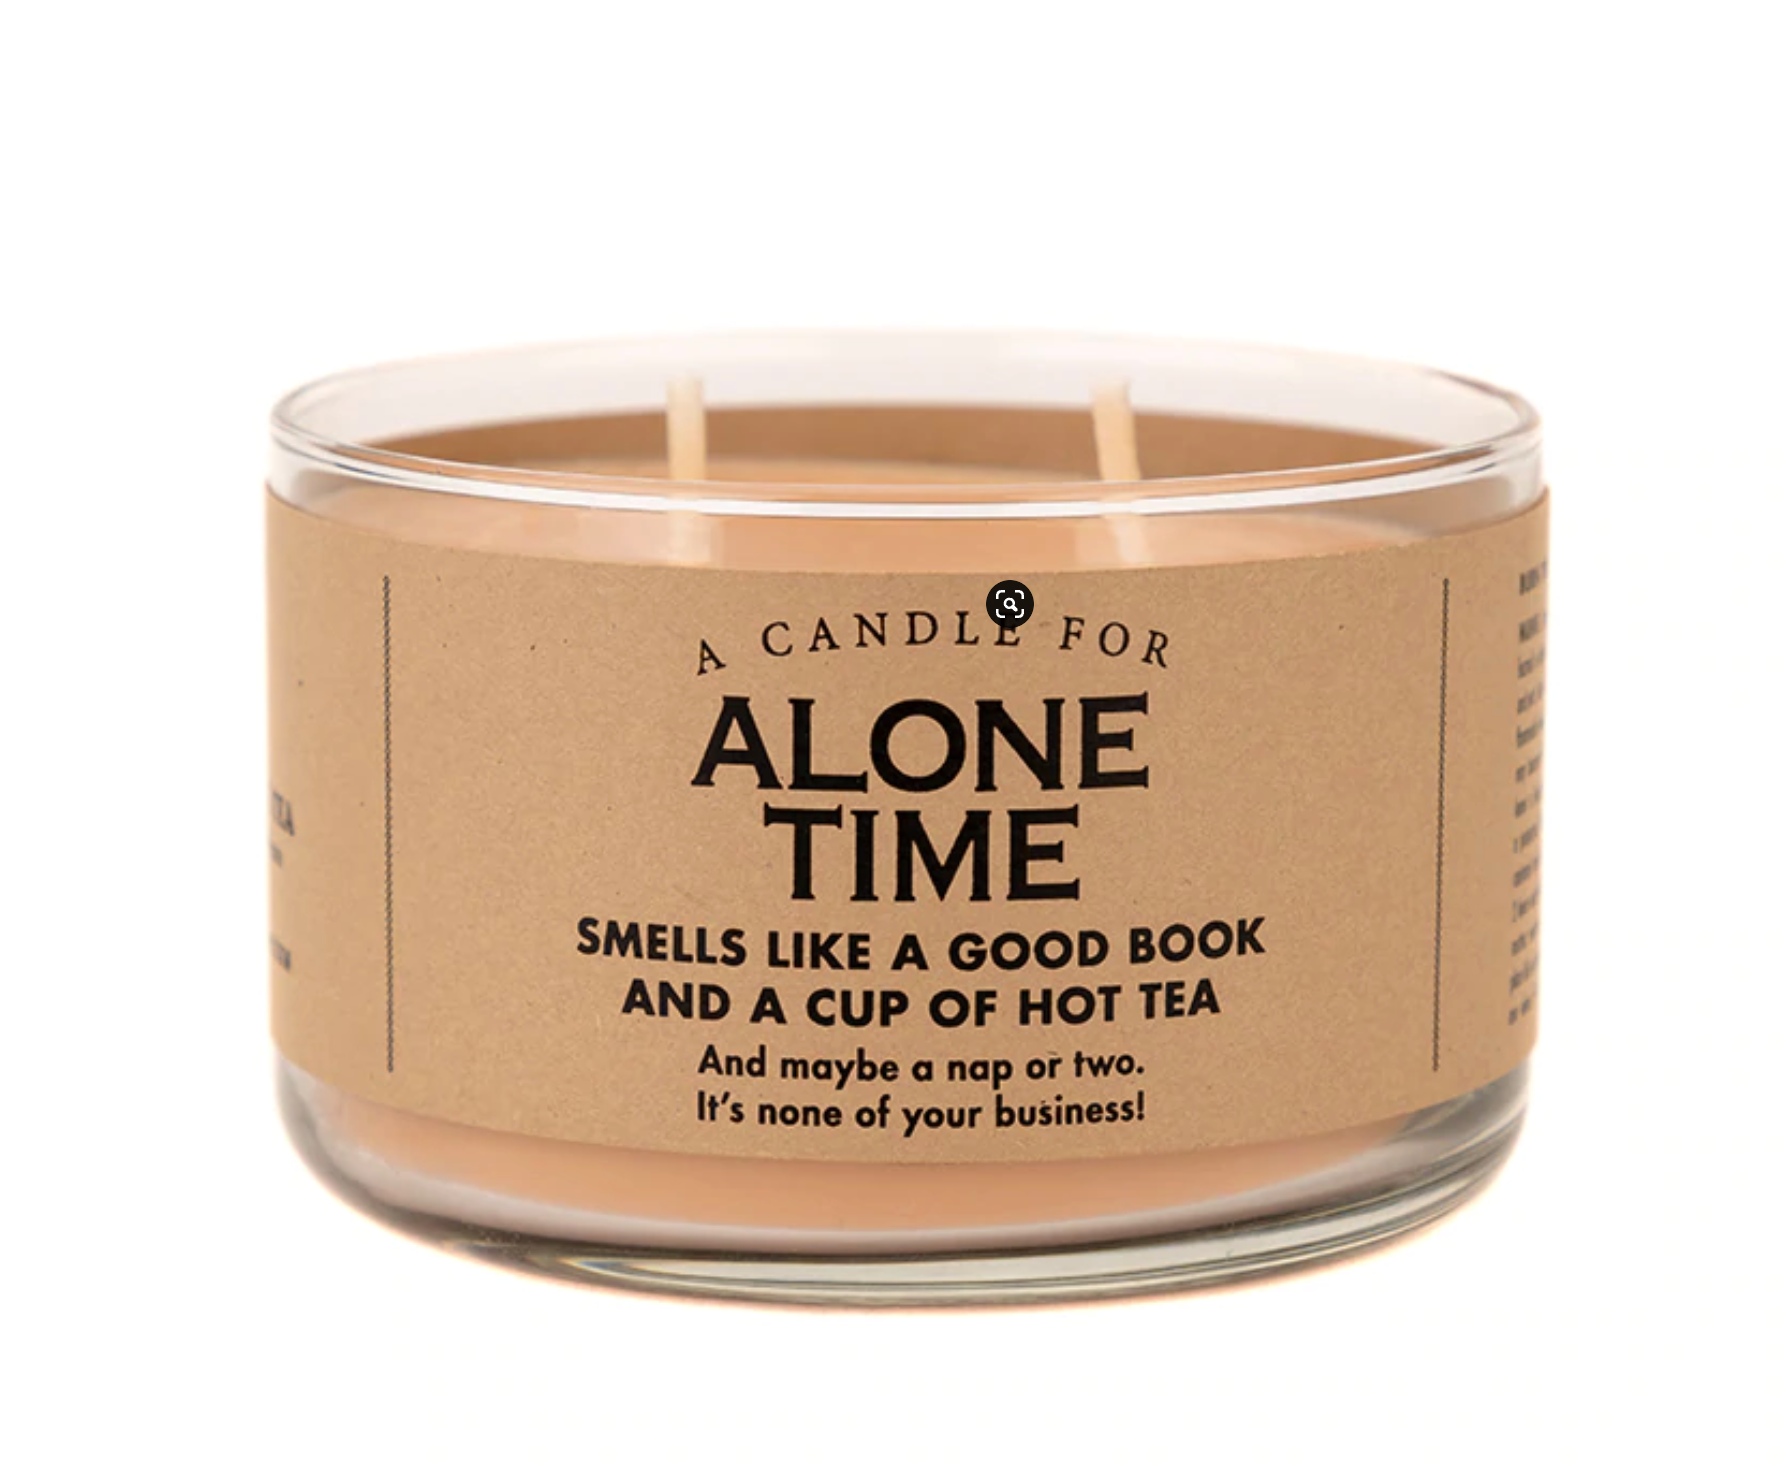 A Candle for Alone Time - Heart of the Home PA